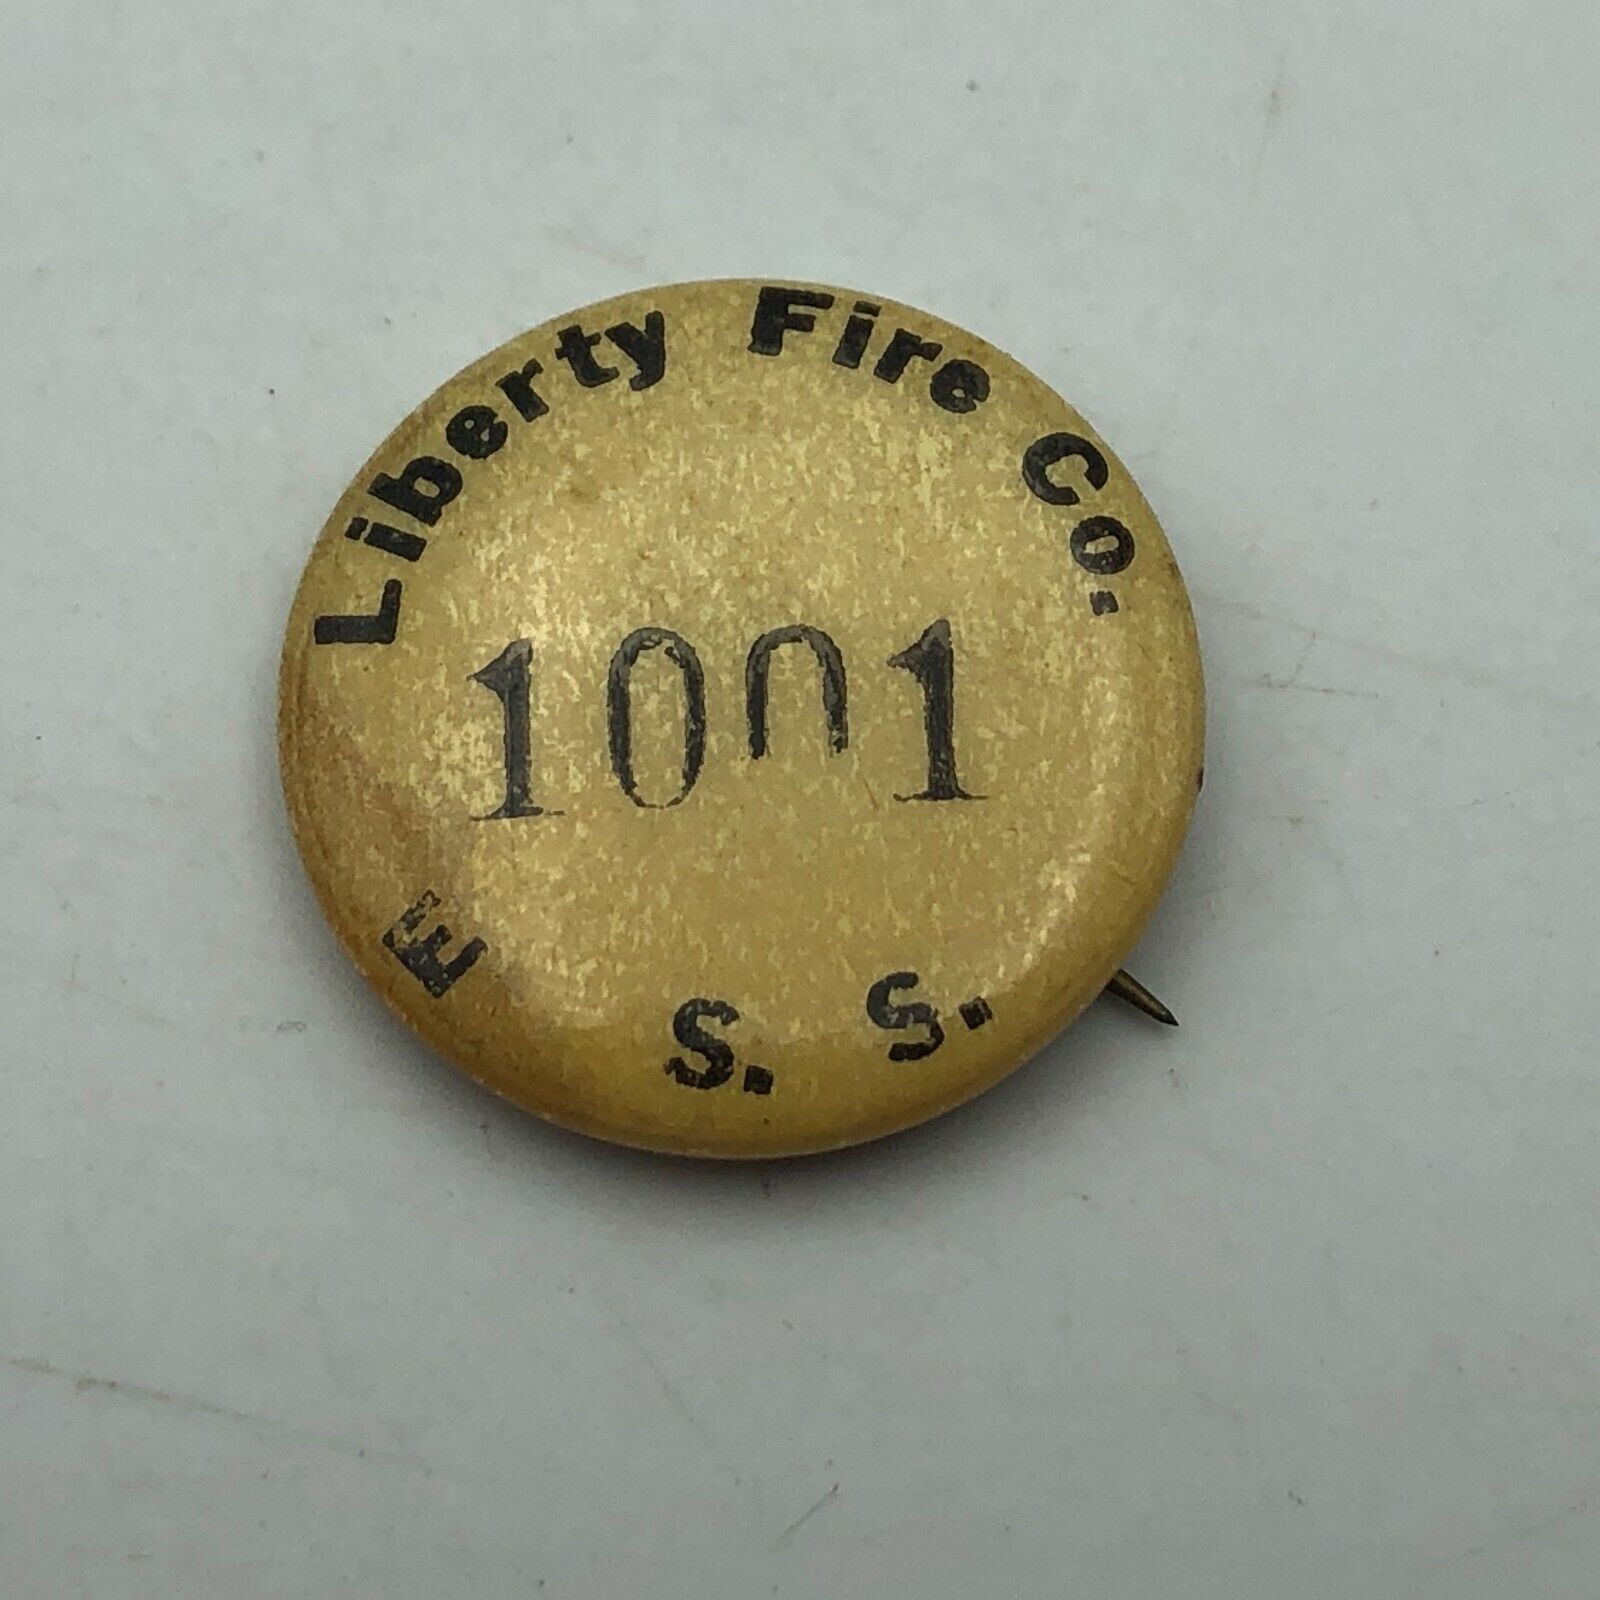 Antique Vtg Liberty Fire Company S.S. Allentown PA Badge Pinback Firefighter G3 